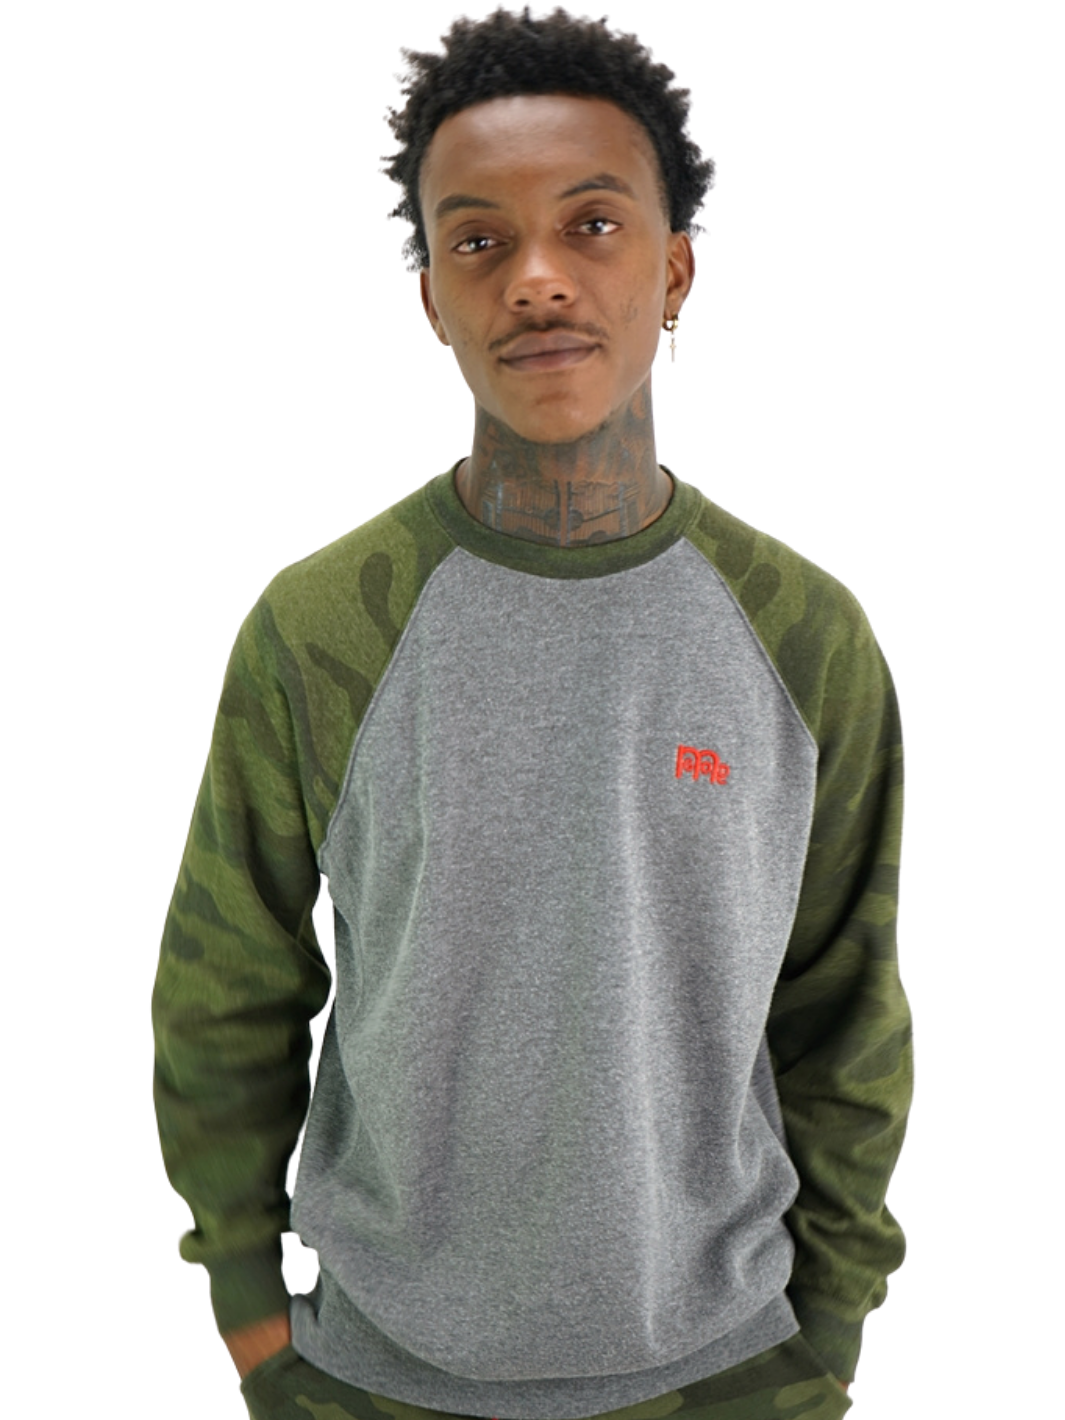 GODinme Crewneck Sweater; luxurious comfort, Grey with Green Camouflage raglan sleeves and embroidered Red GODinme logo at left chest.